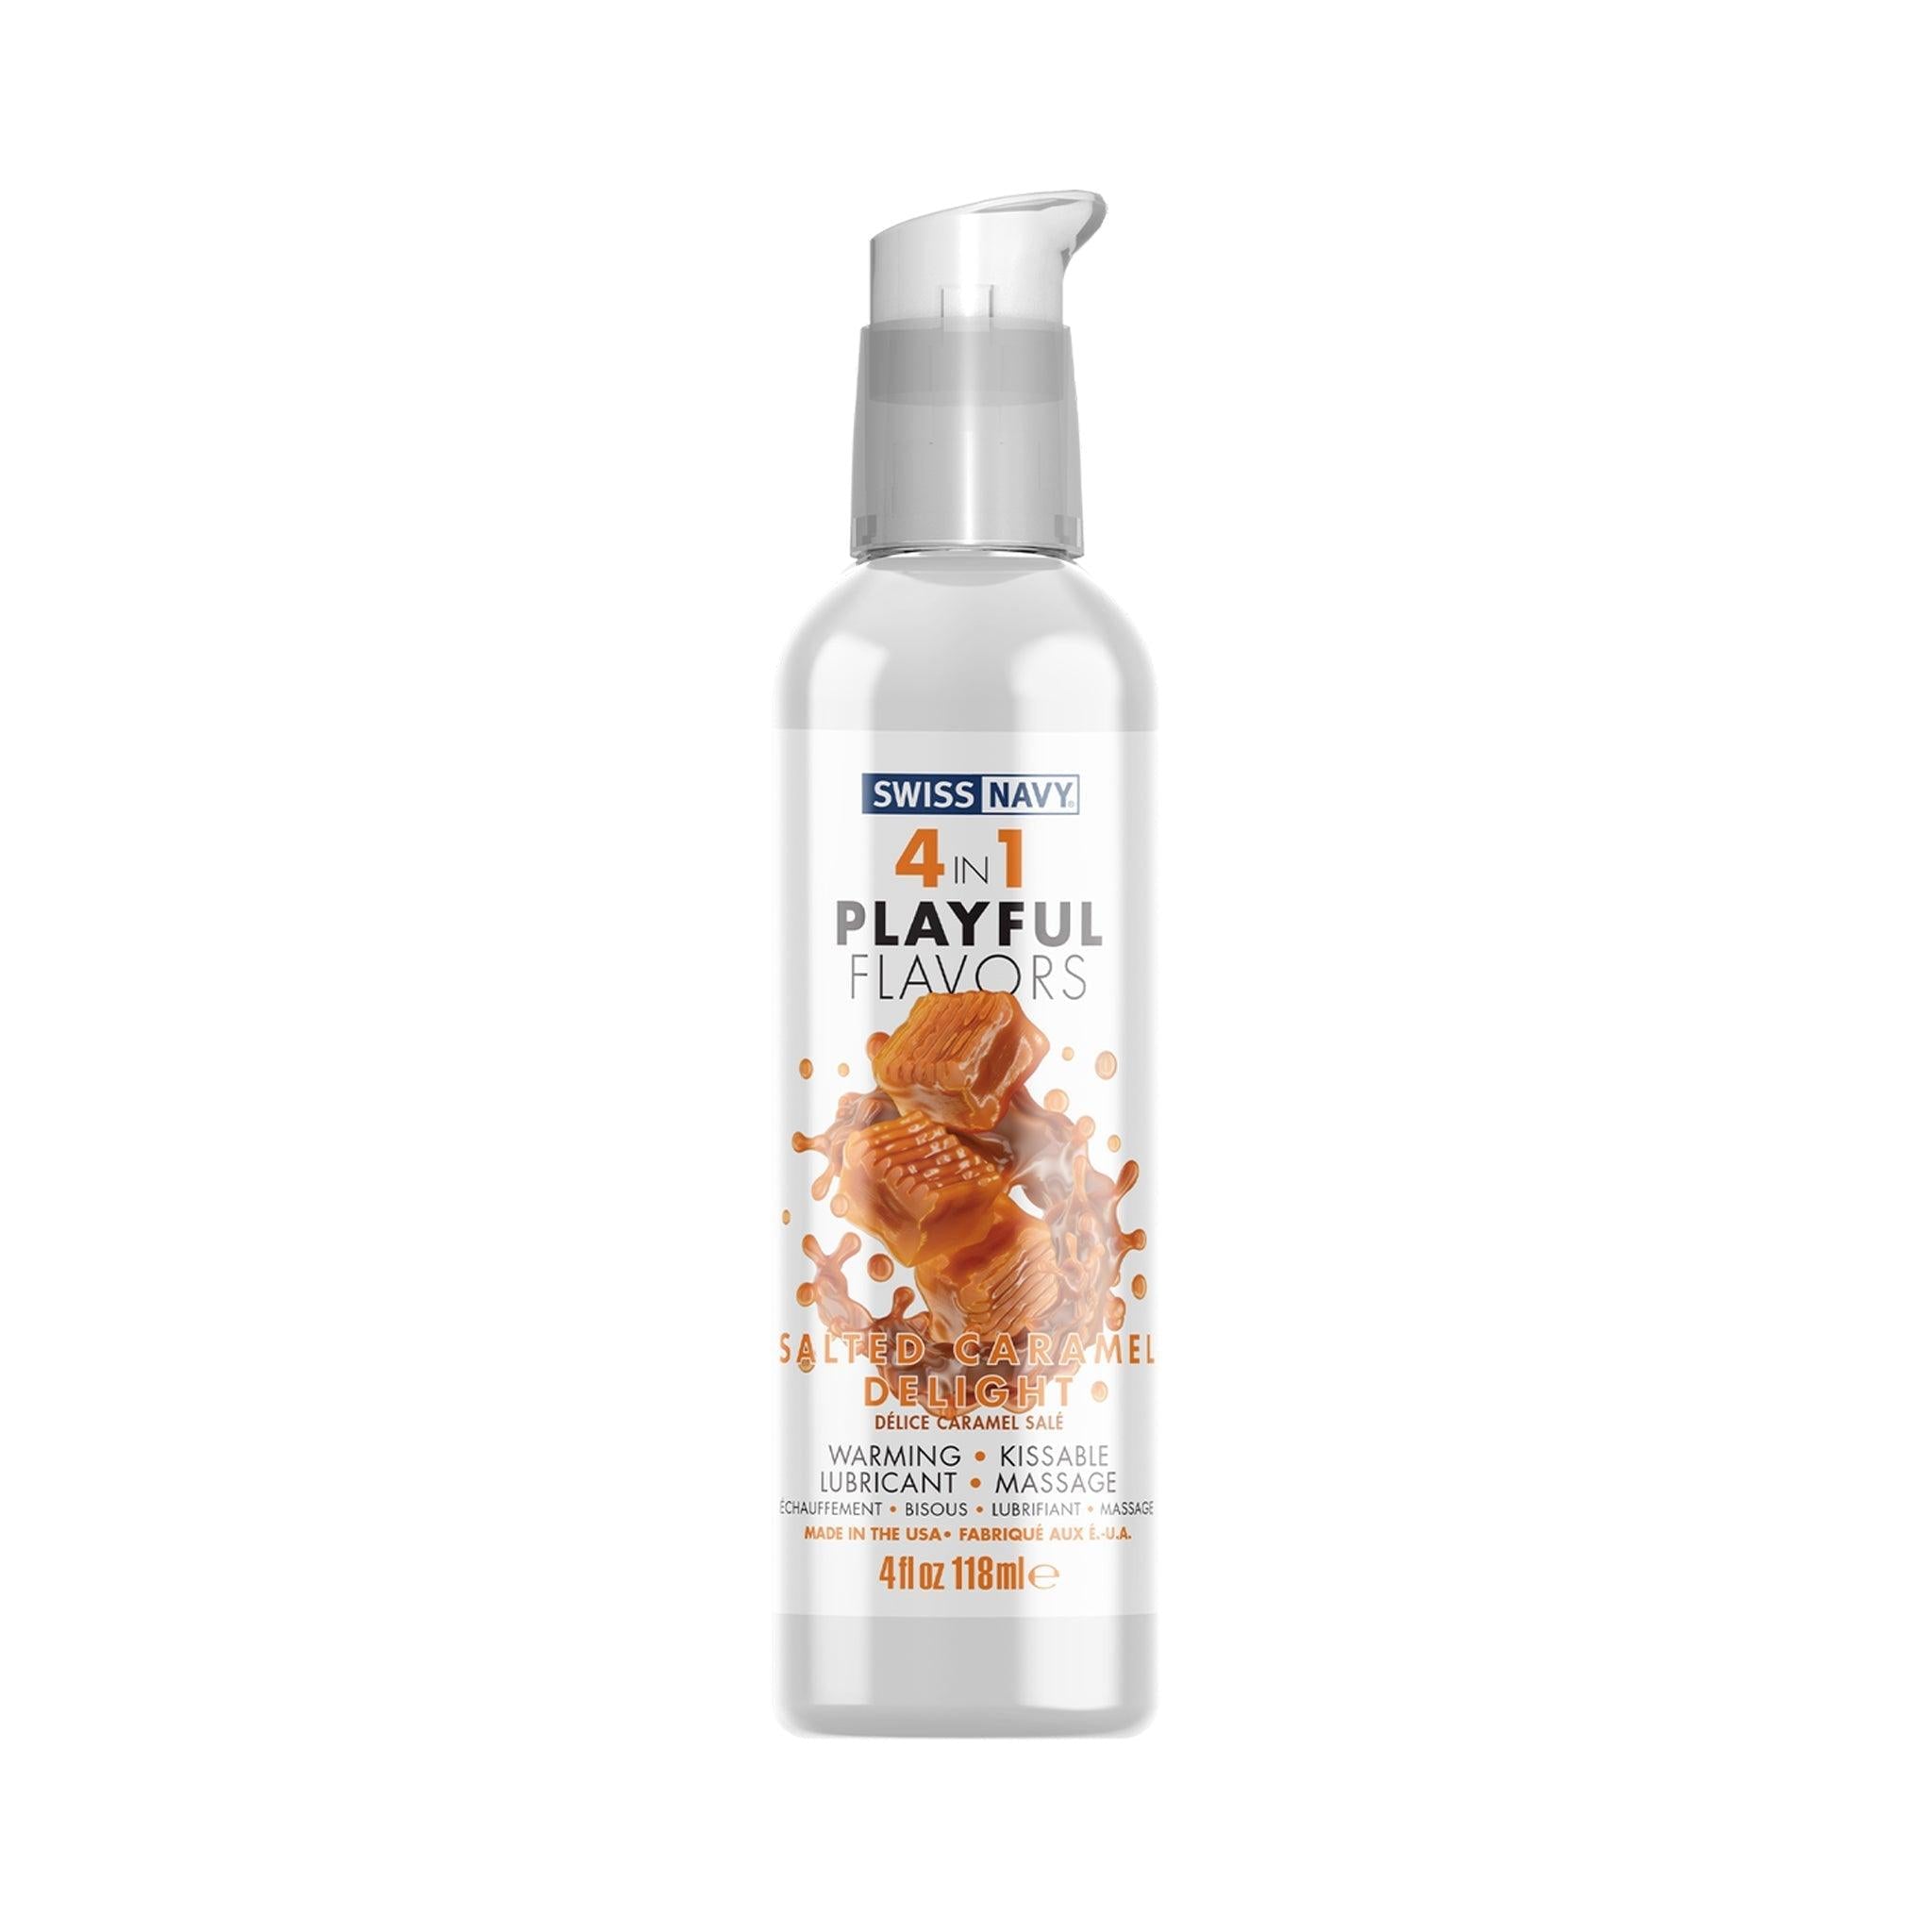 Swiss Navy 4 in 1 Playful Flavors - Warming Kissable Massage Lubricant 4oz (118 mL) - CheapLubes.com